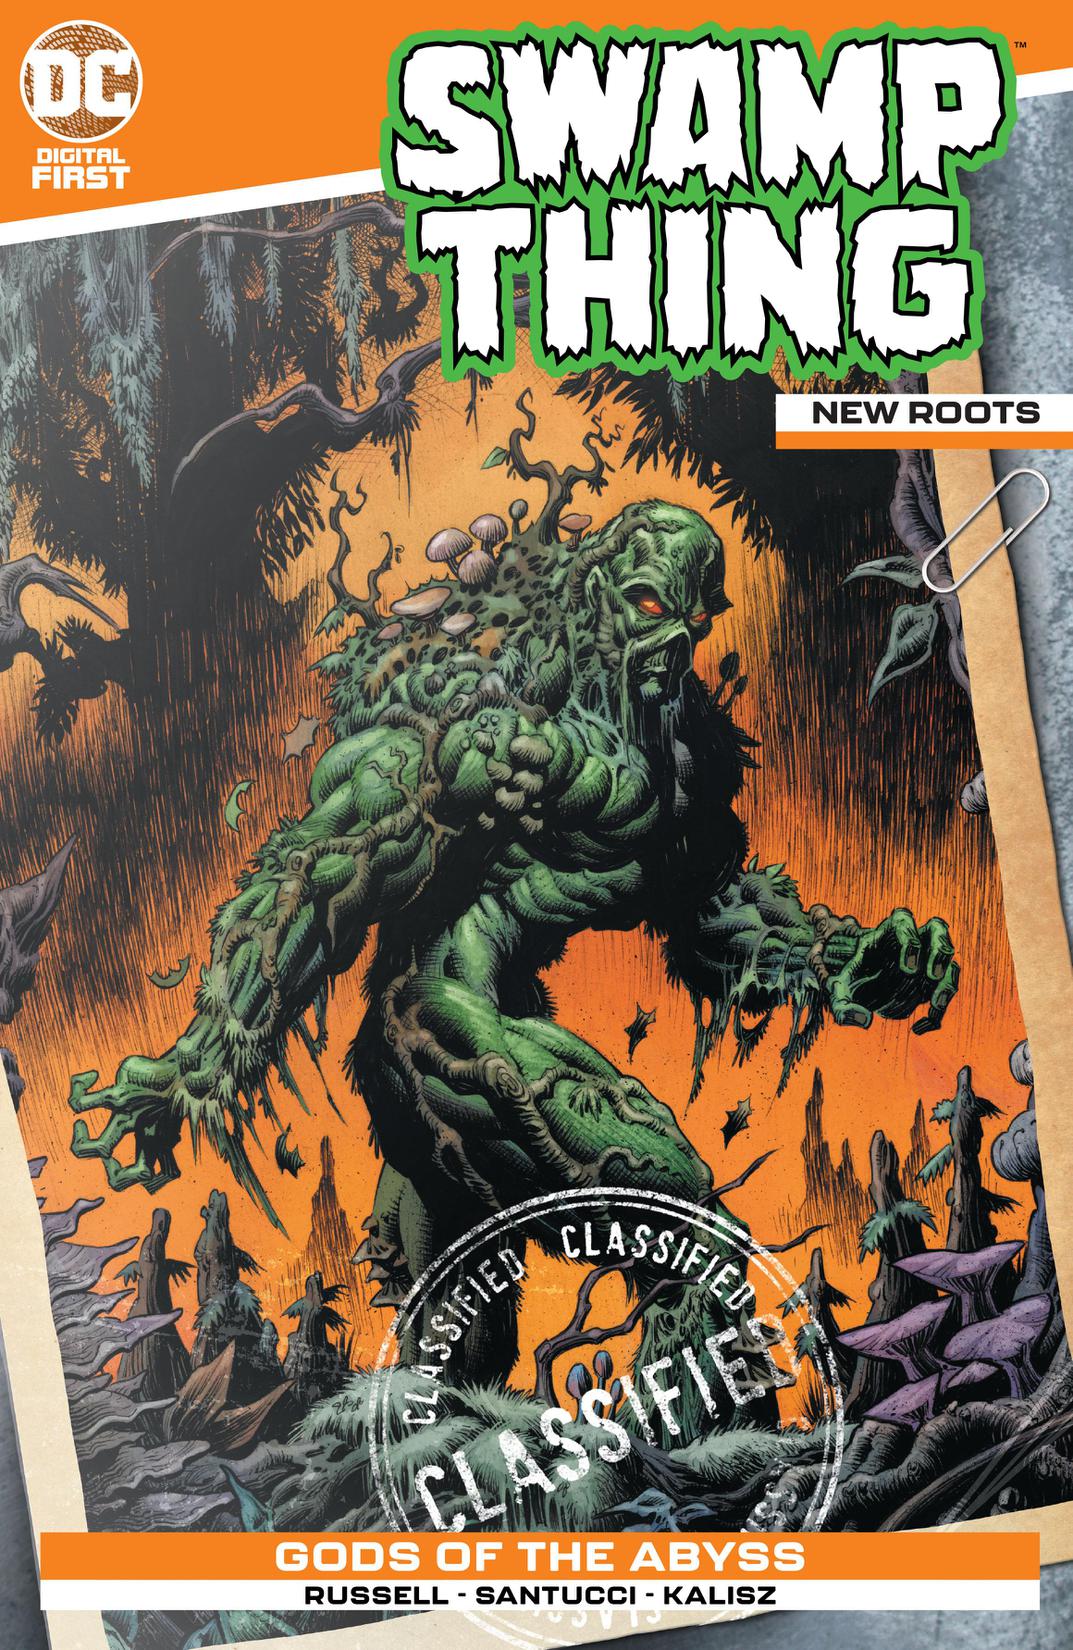 Swamp Thing: New Roots #3 preview images